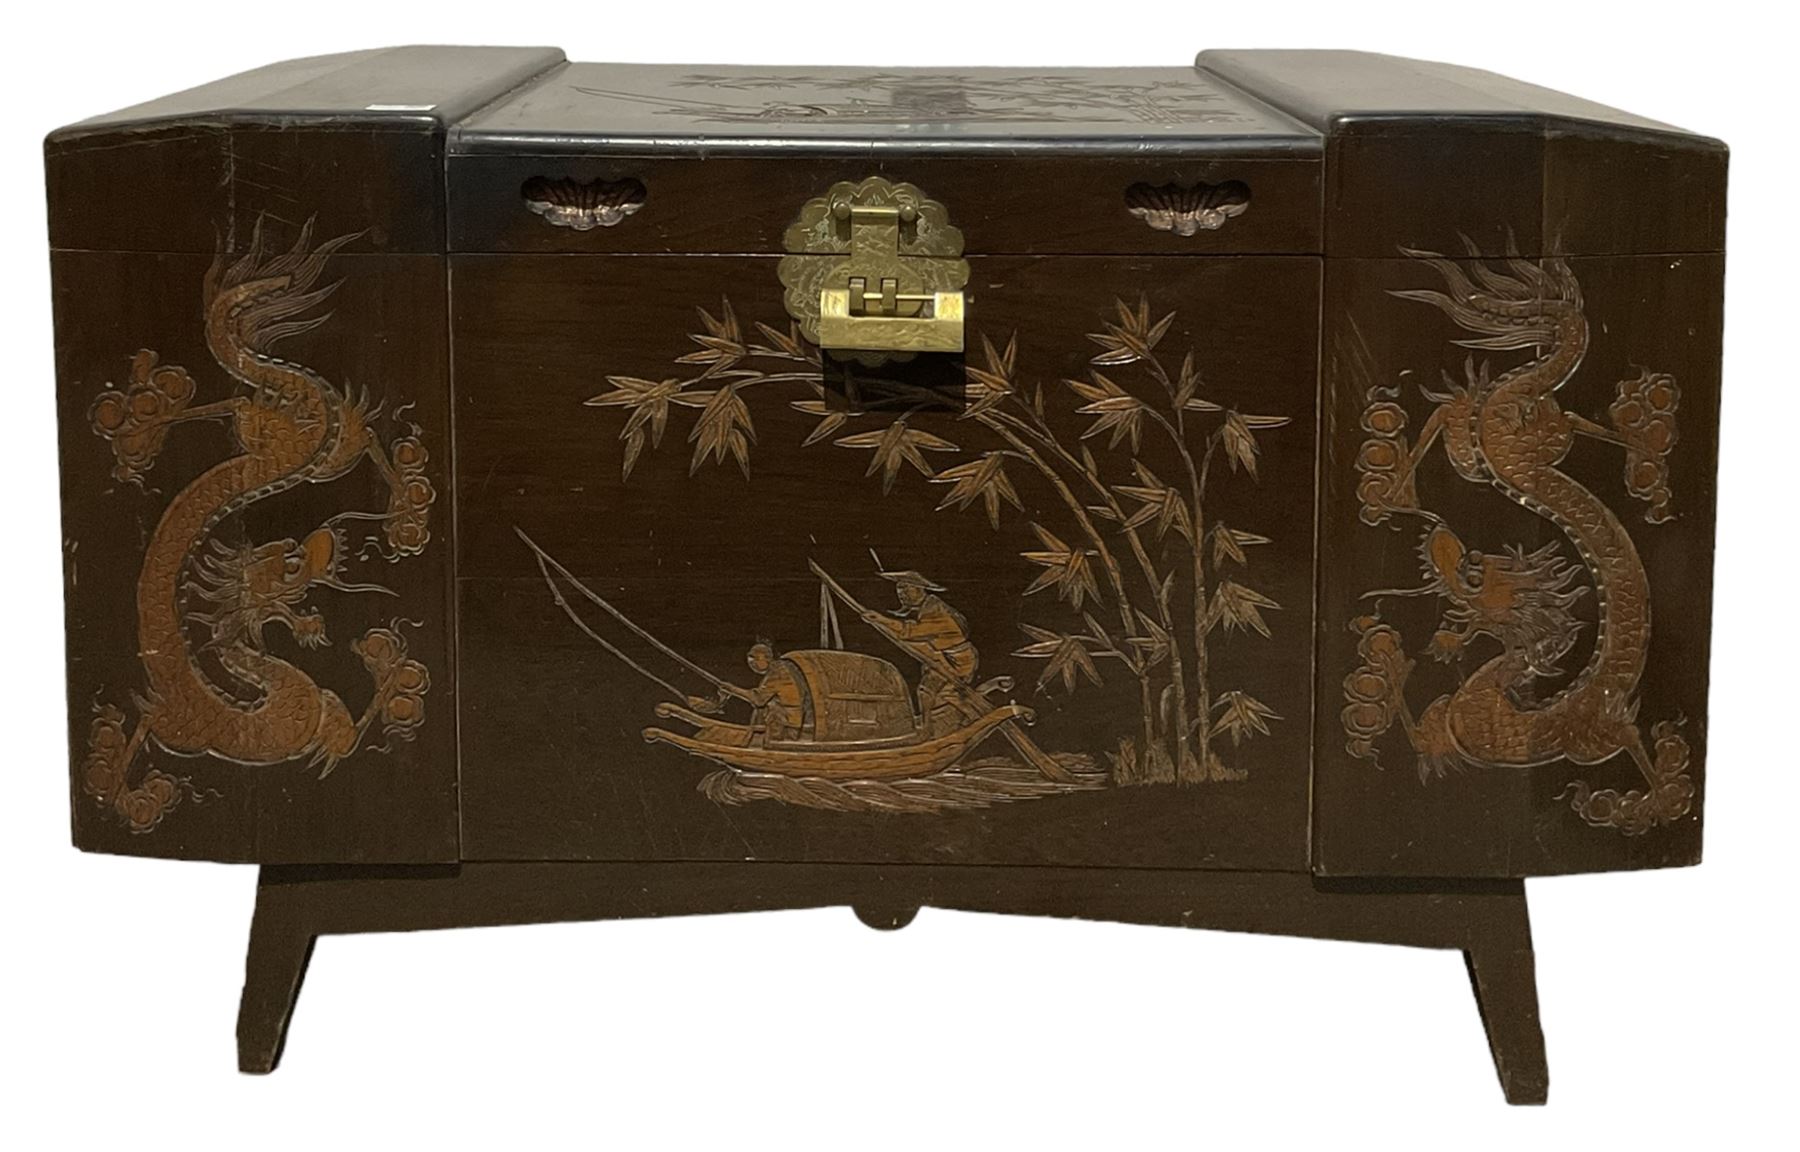 Early to mid-20th century Singaporean hardwood chest